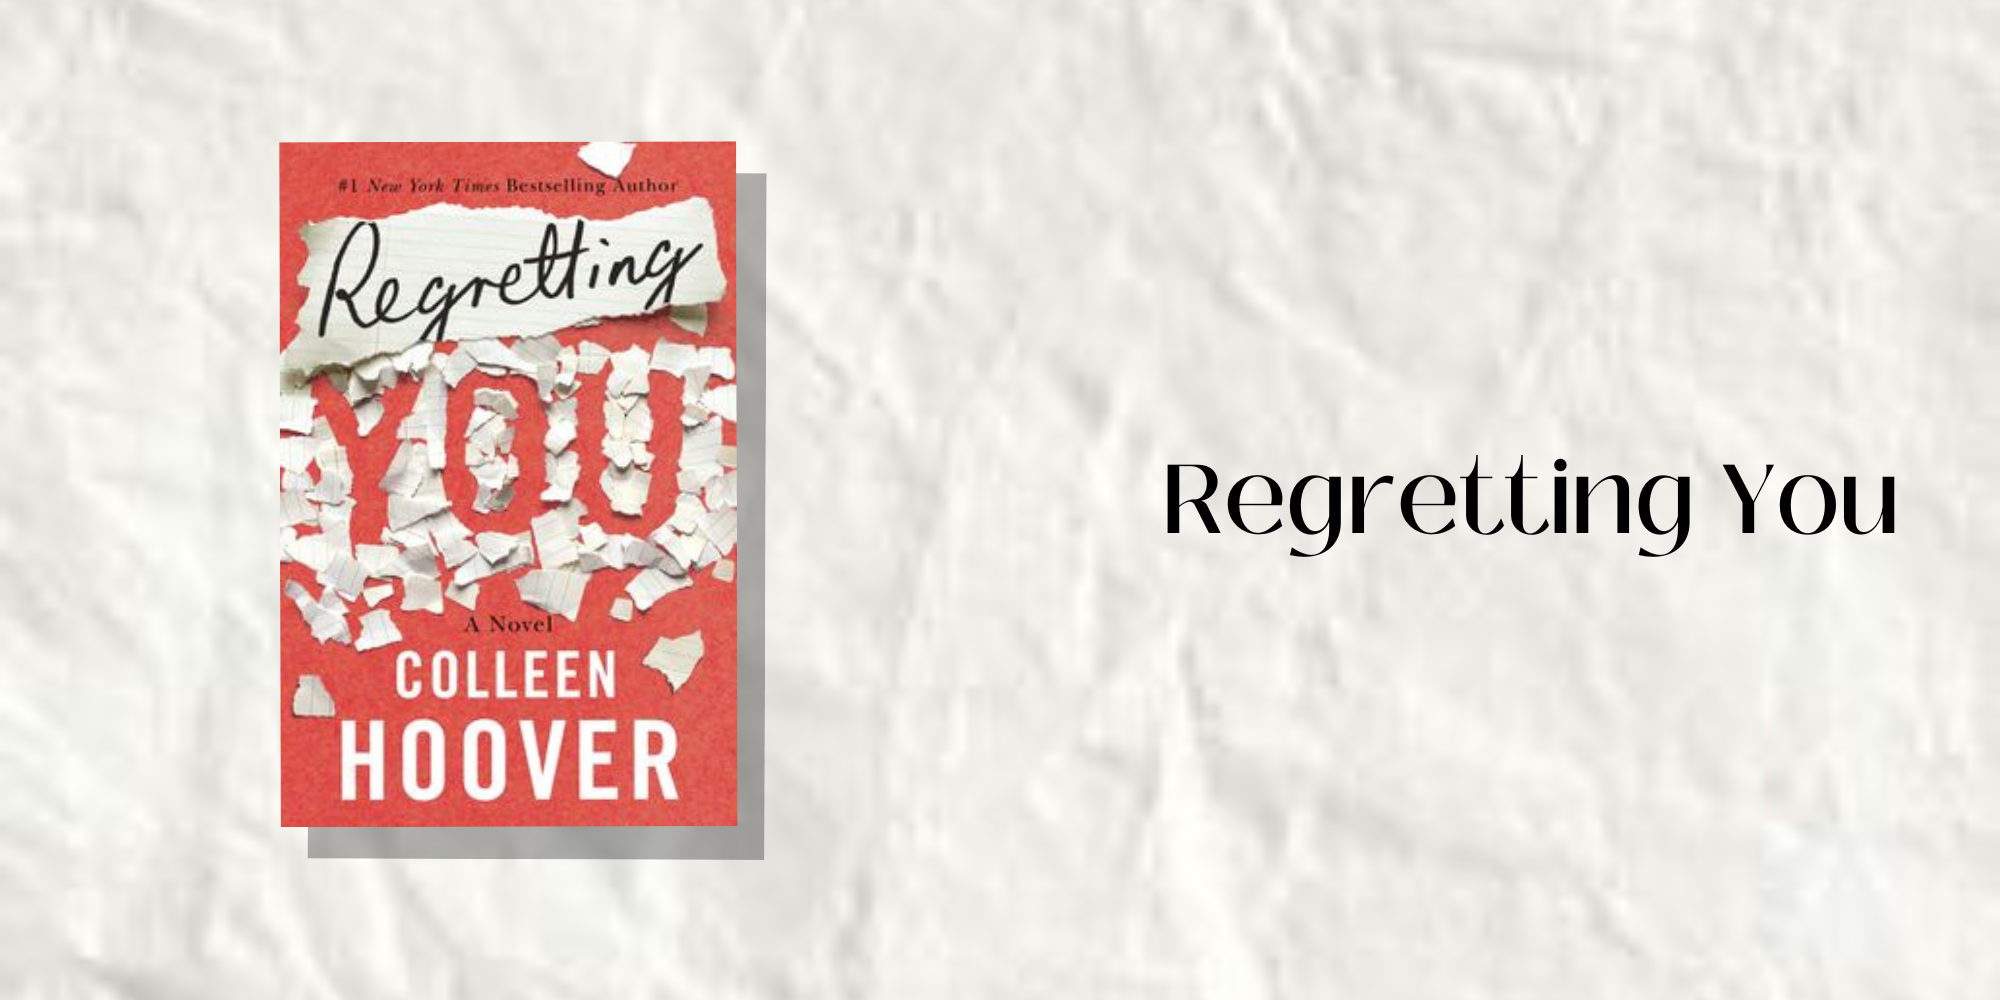 Colleen Hoover is the hottest author in America. She also may be the most  controversial